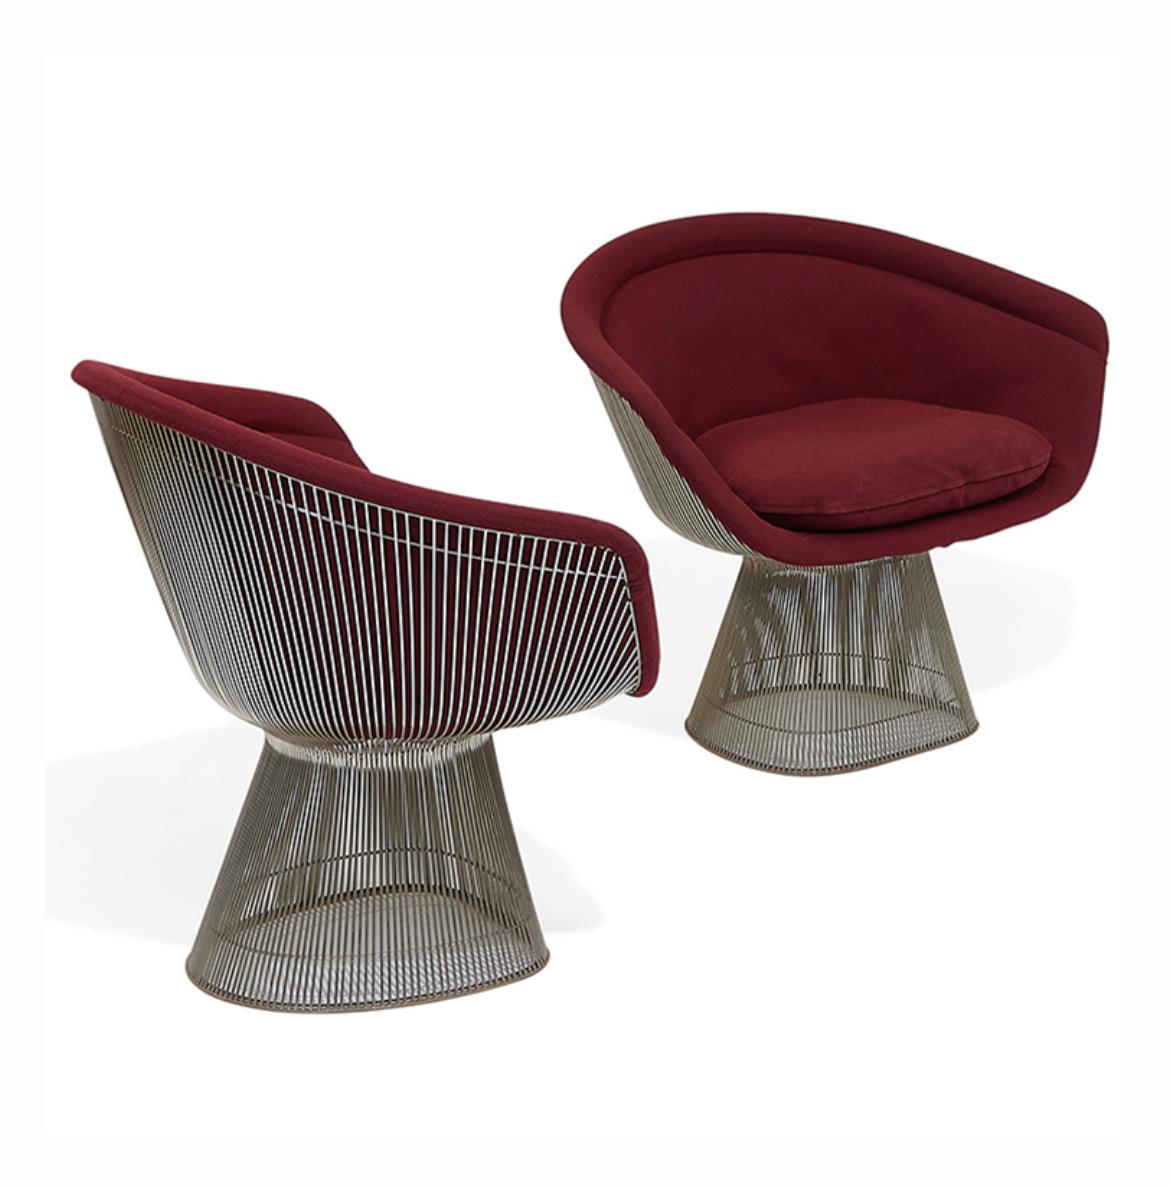 American Set of Four Chairs by Warren Platner